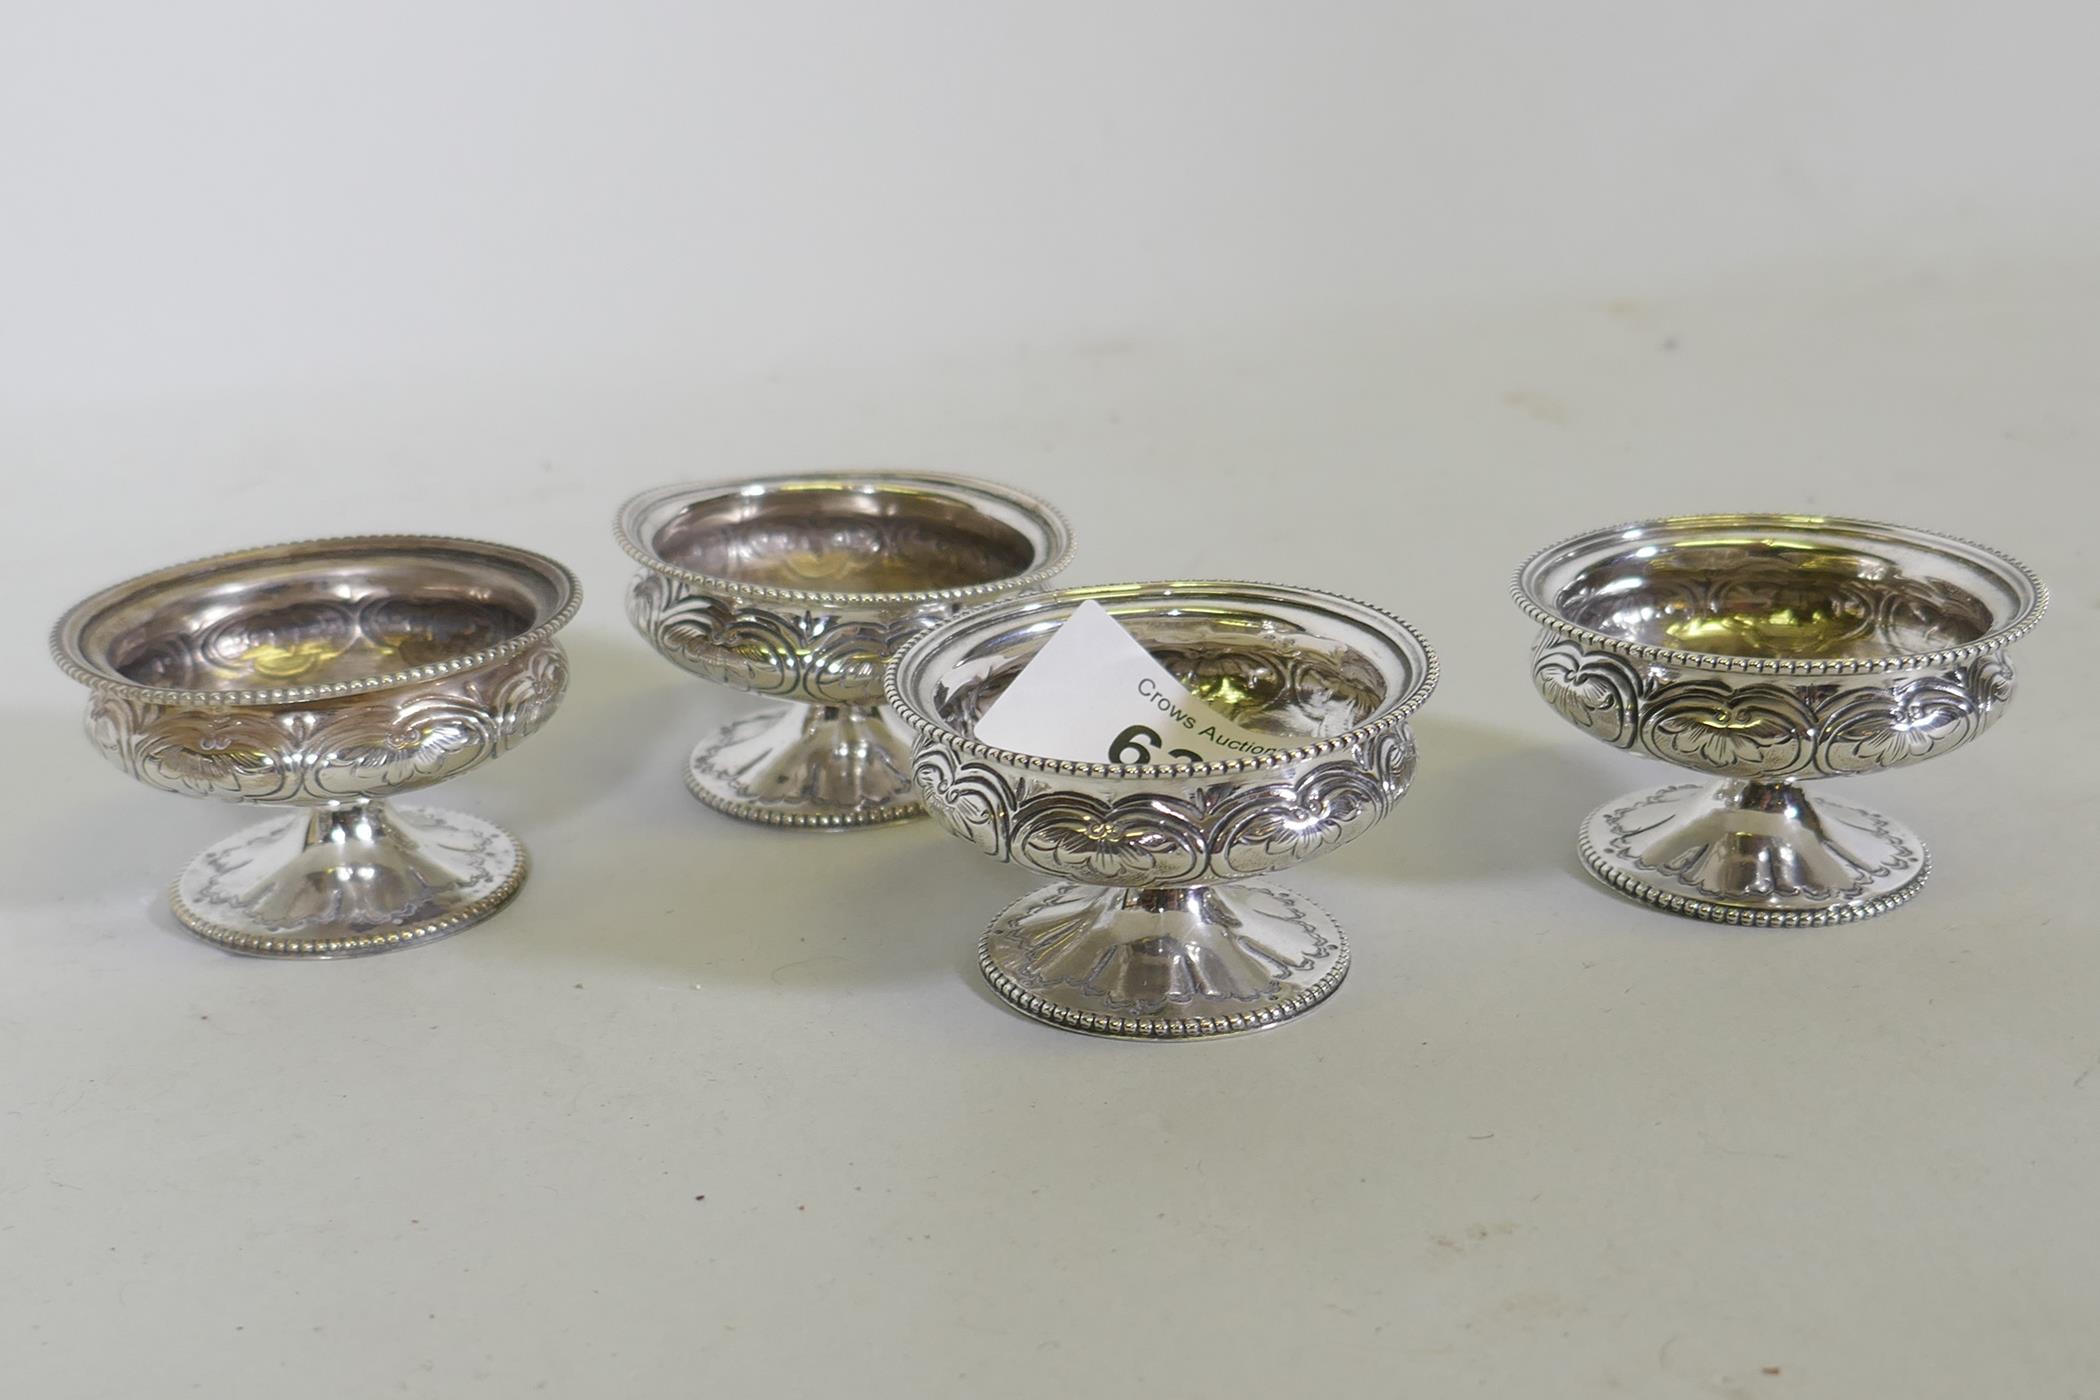 A set of four Victorian hallmarked silver salts, London 1868, W.H. maker, 148g total